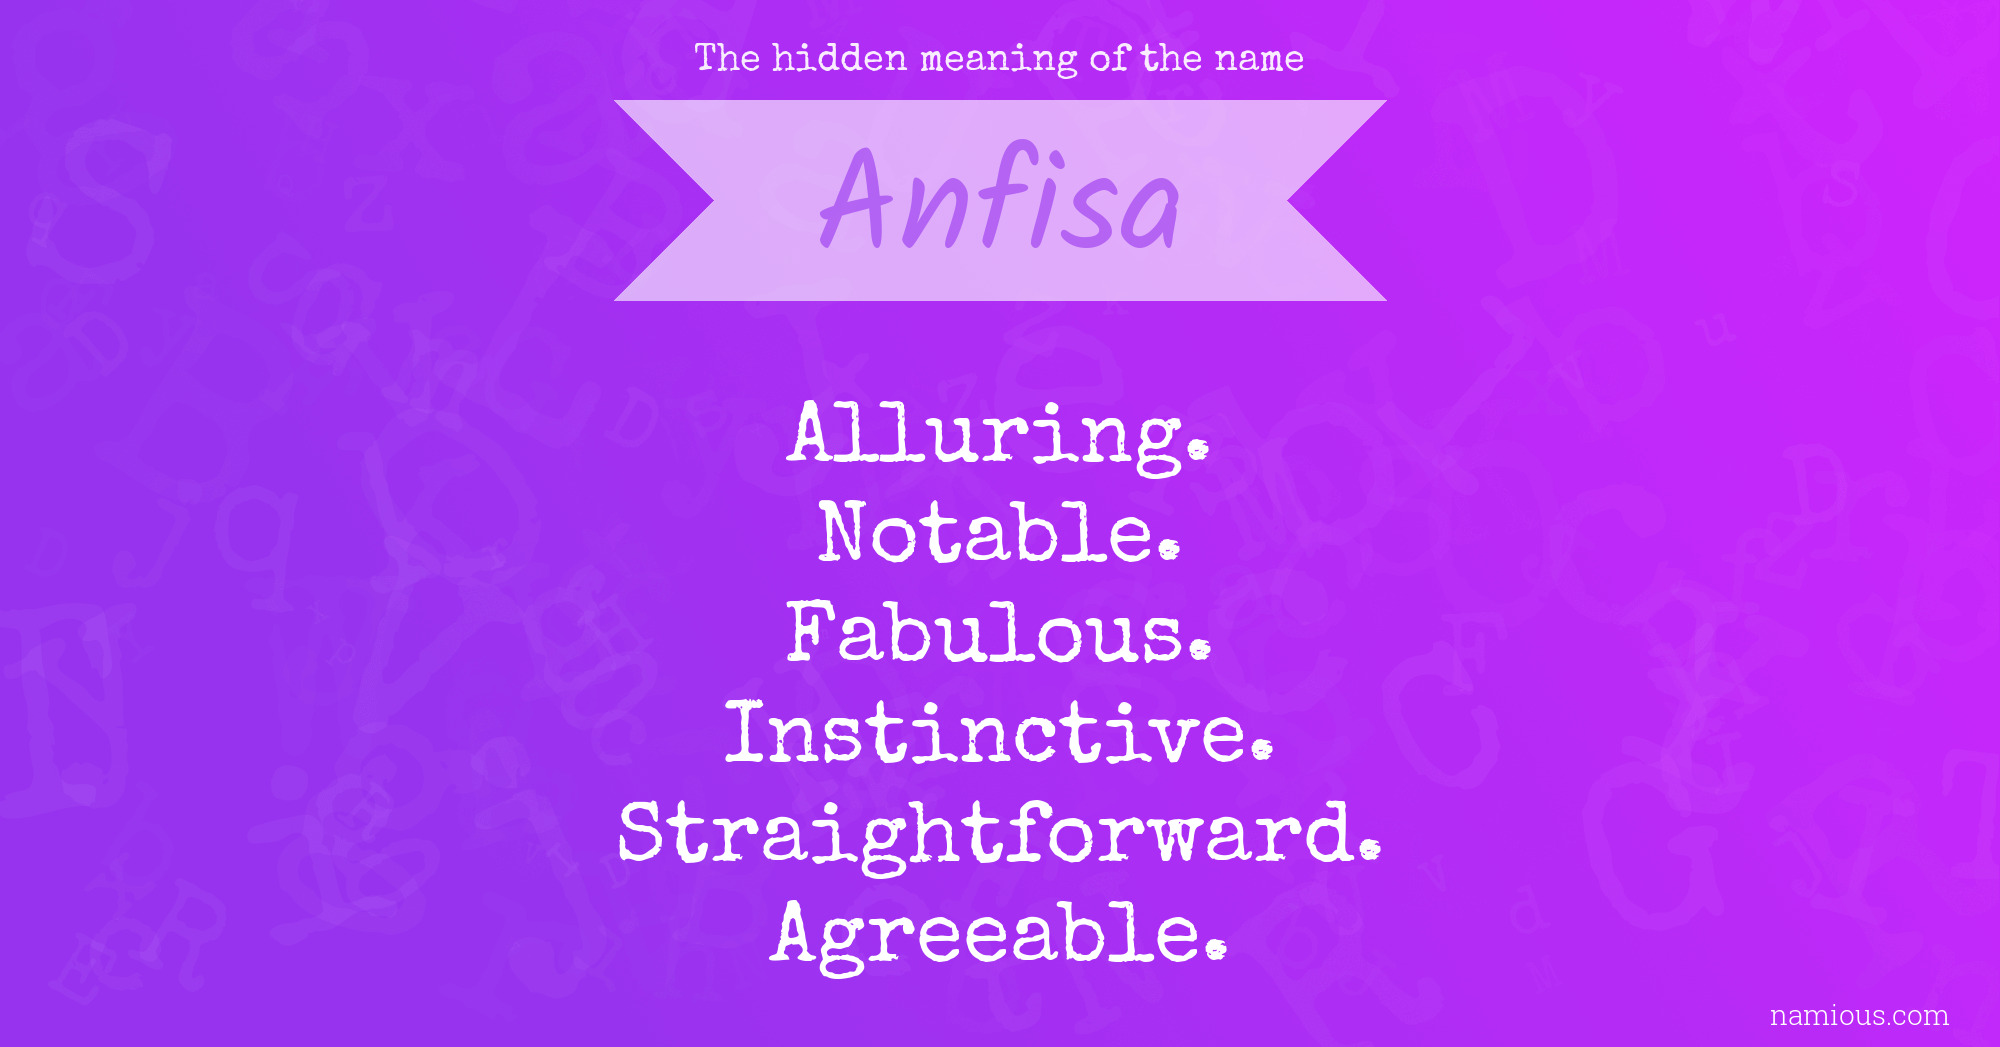 The hidden meaning of the name Anfisa